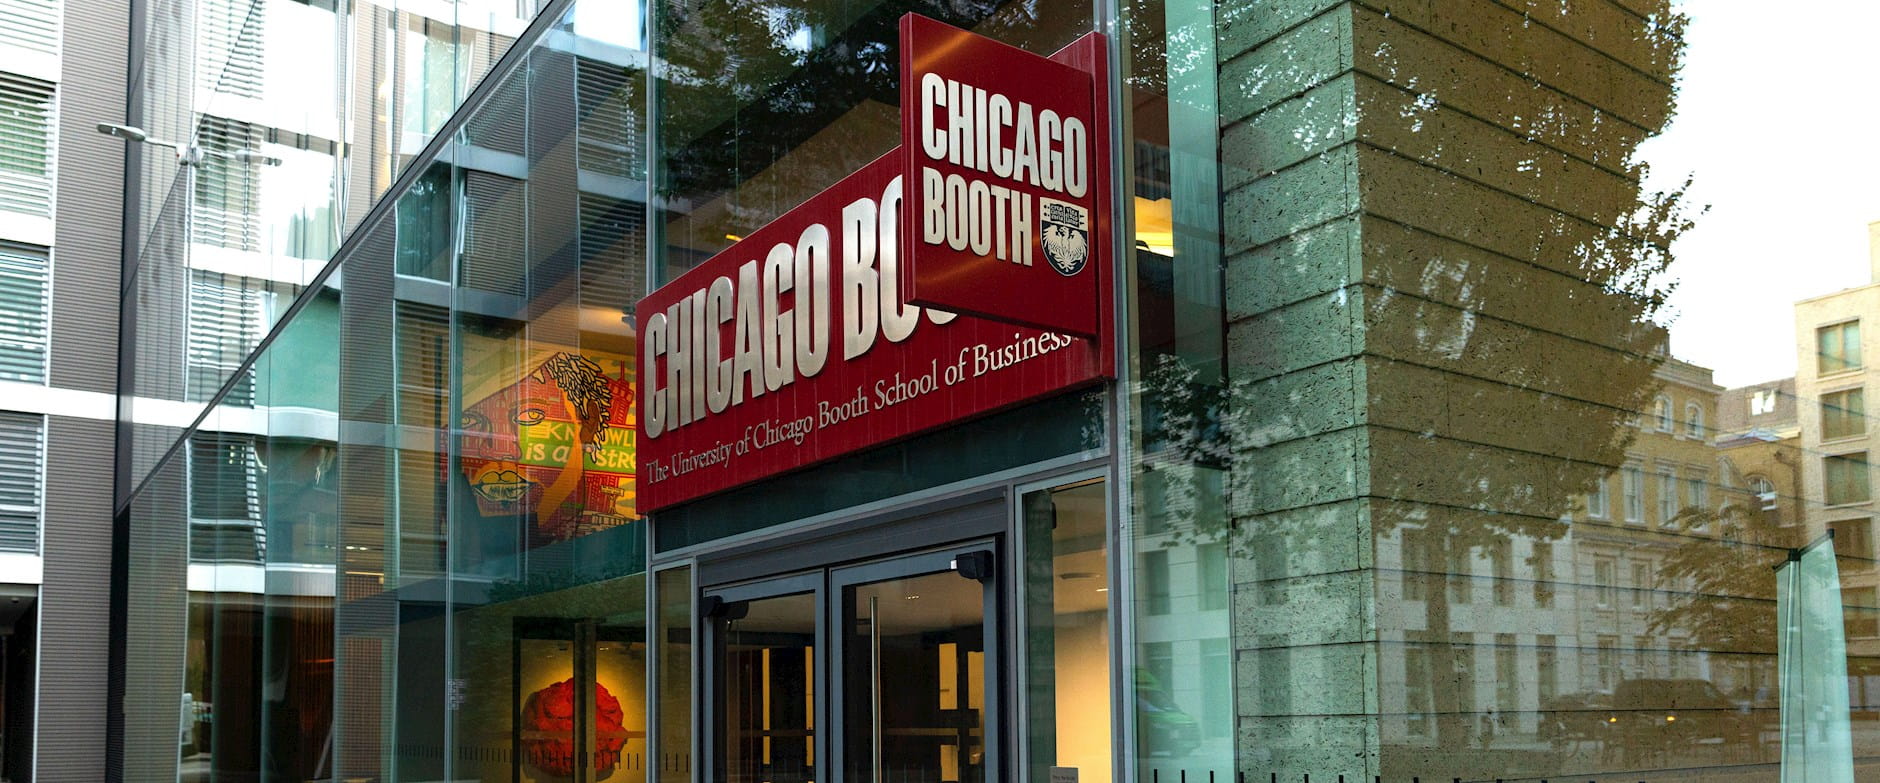 Chicago Booth Rothman London Campus exterior 